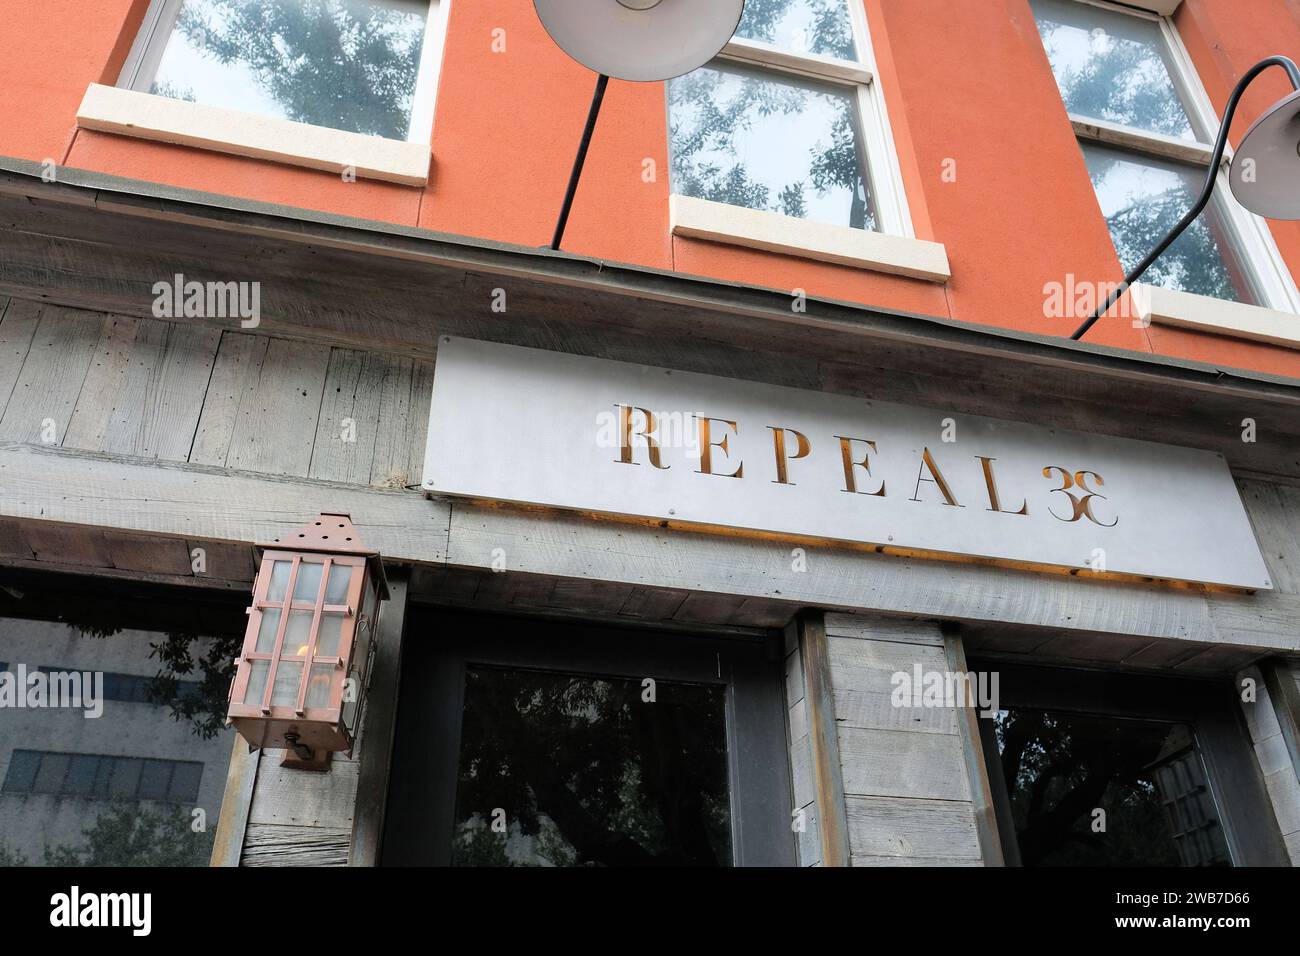 Exterior view of Repeal 33, an upscale cocktail bar and restaurant in the historic section of downtown Savannah, Georgia; Southern cuisine. Stock Photo